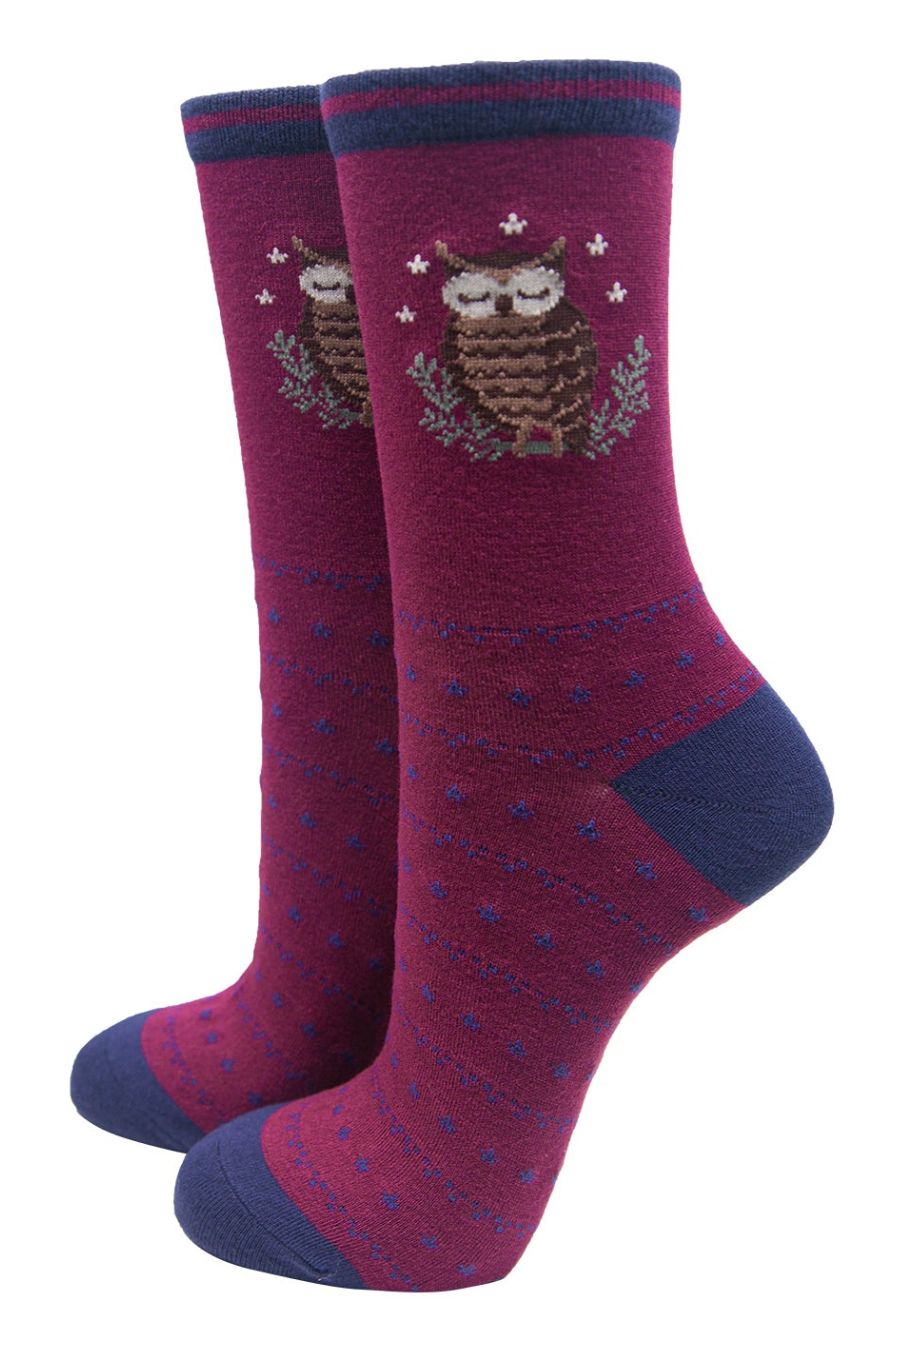 burgundy and navy blue ankle socks featuring a sleeping owl 